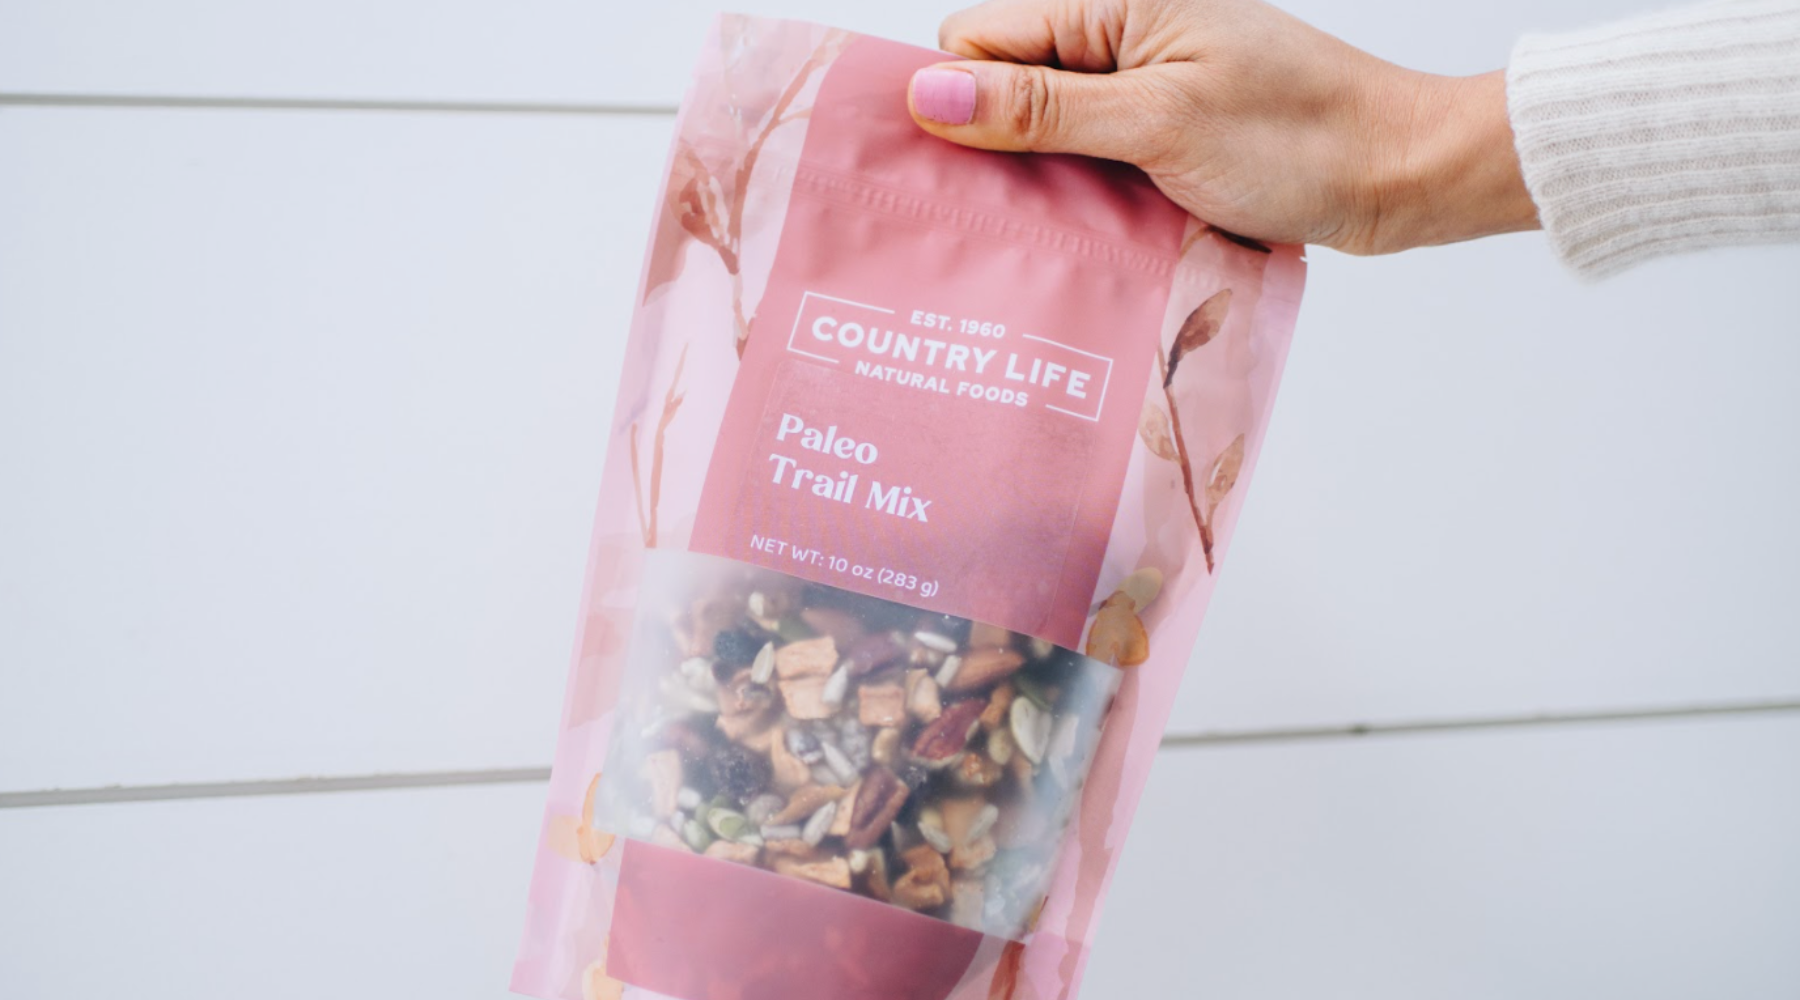 IS TRAIL MIX HEALTHY? ALL YOUR QUESTIONS ON TRAIL MIX ANSWERED!